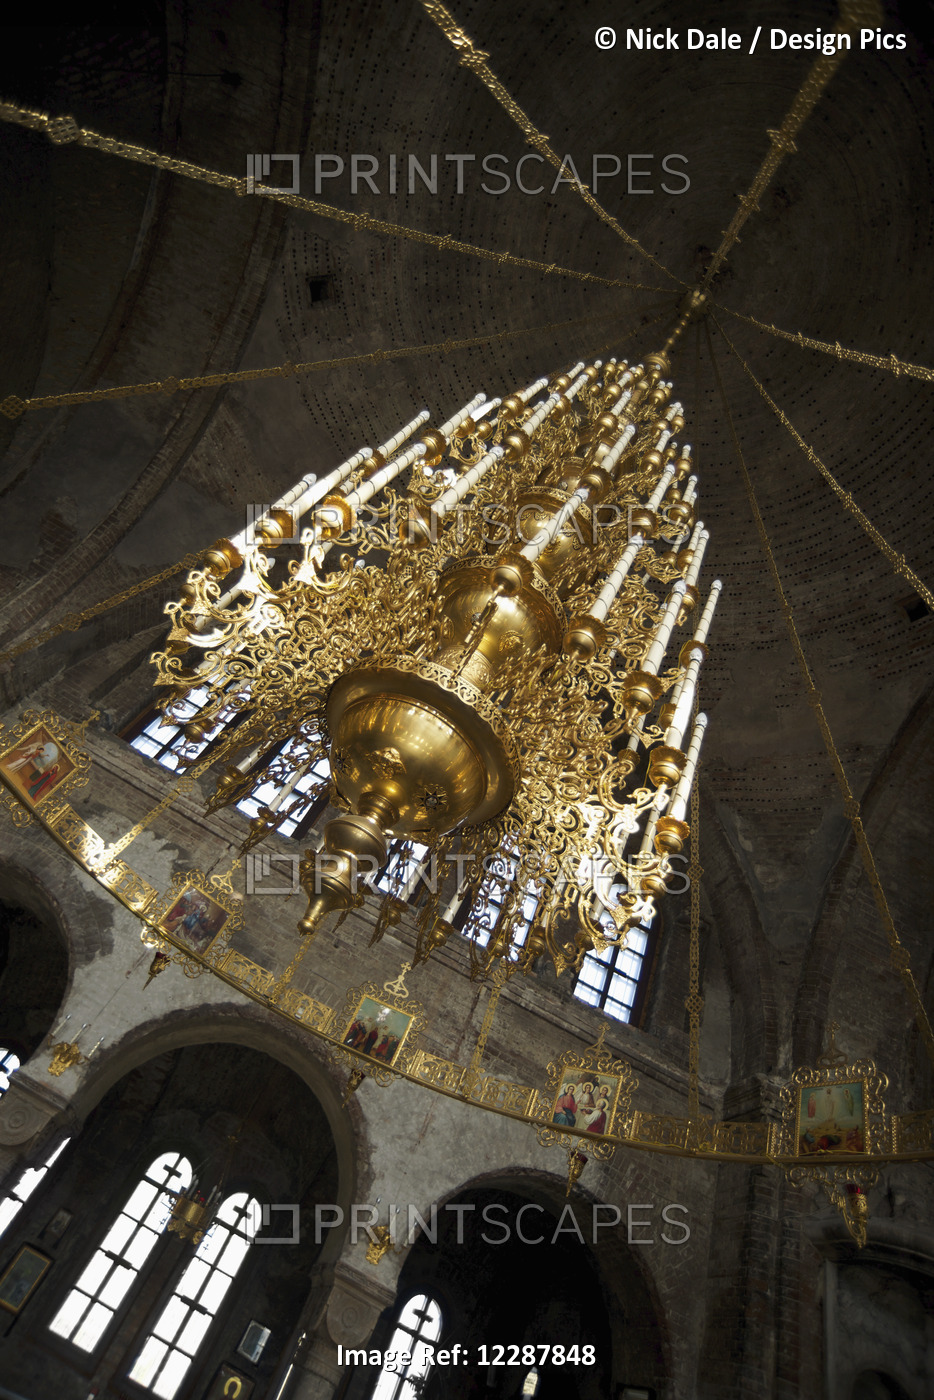 Low Angle View Of Chandelier At St Nicholas Church; Brest, Belarus